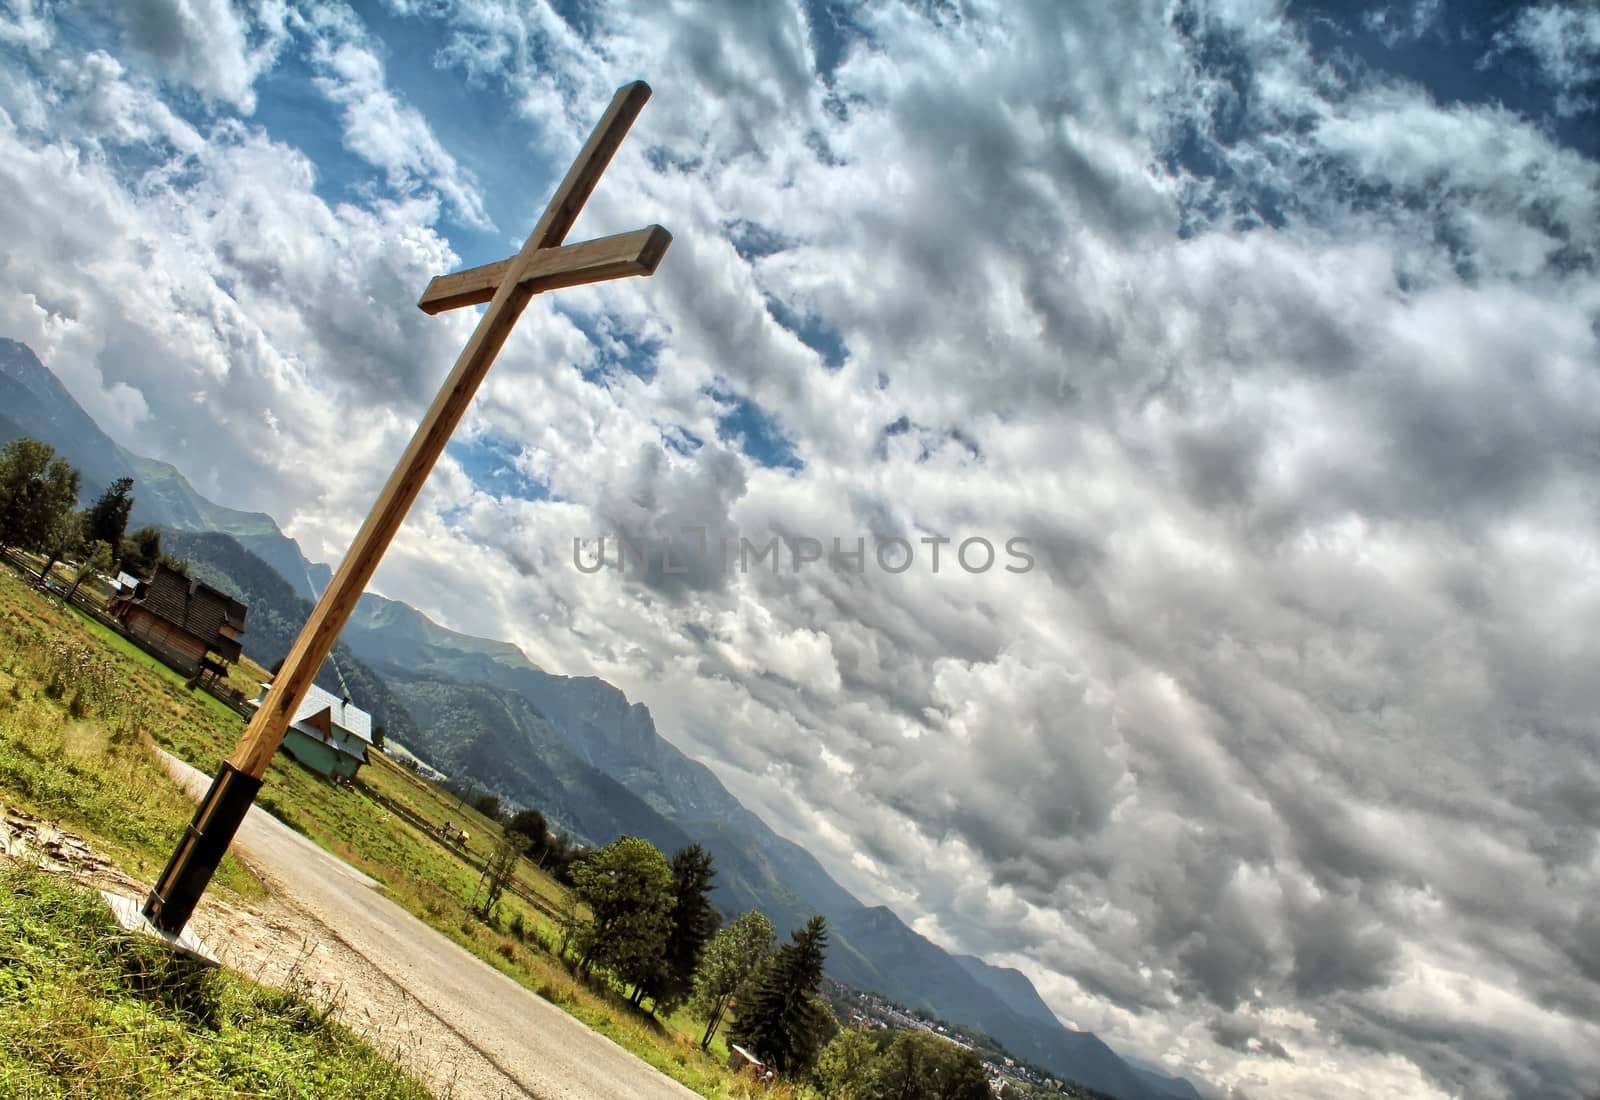 Wooden cross against a blue sky full of clouds